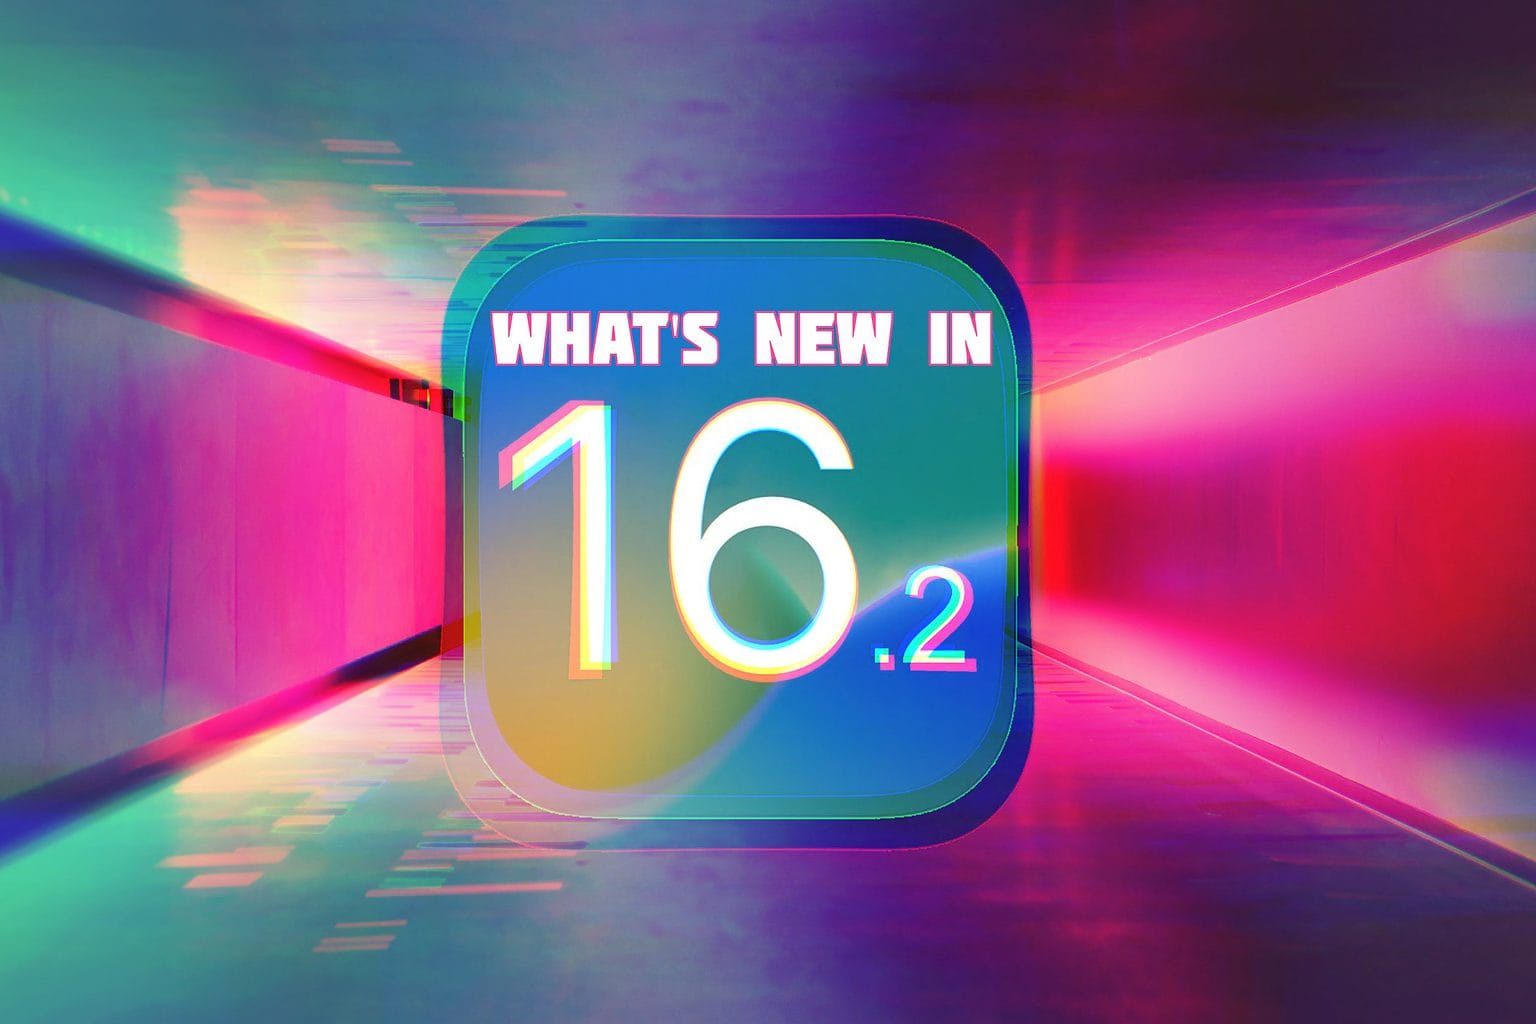 Try out these 10 new iOS 16.2 features on your iPhone ASAP.